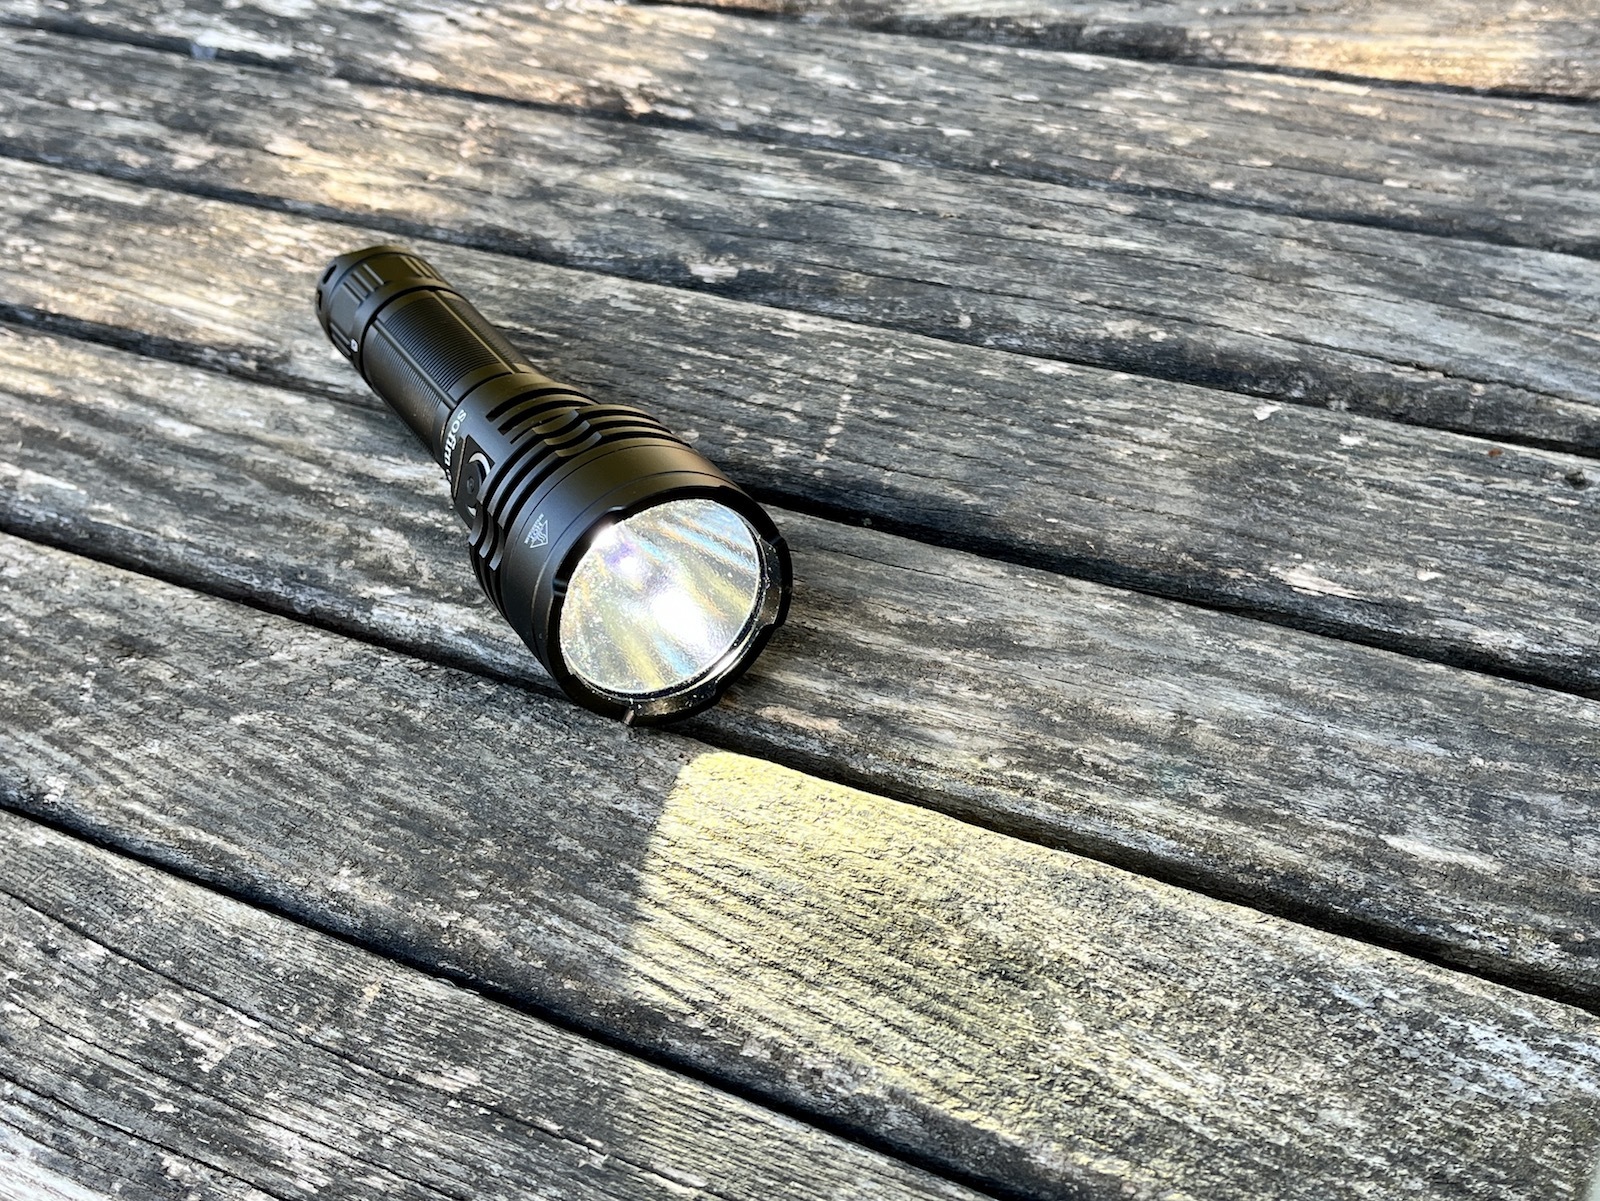 Sofirn C8L review, Thrower flashlight with 3,000 lumens and 70 kcd throw